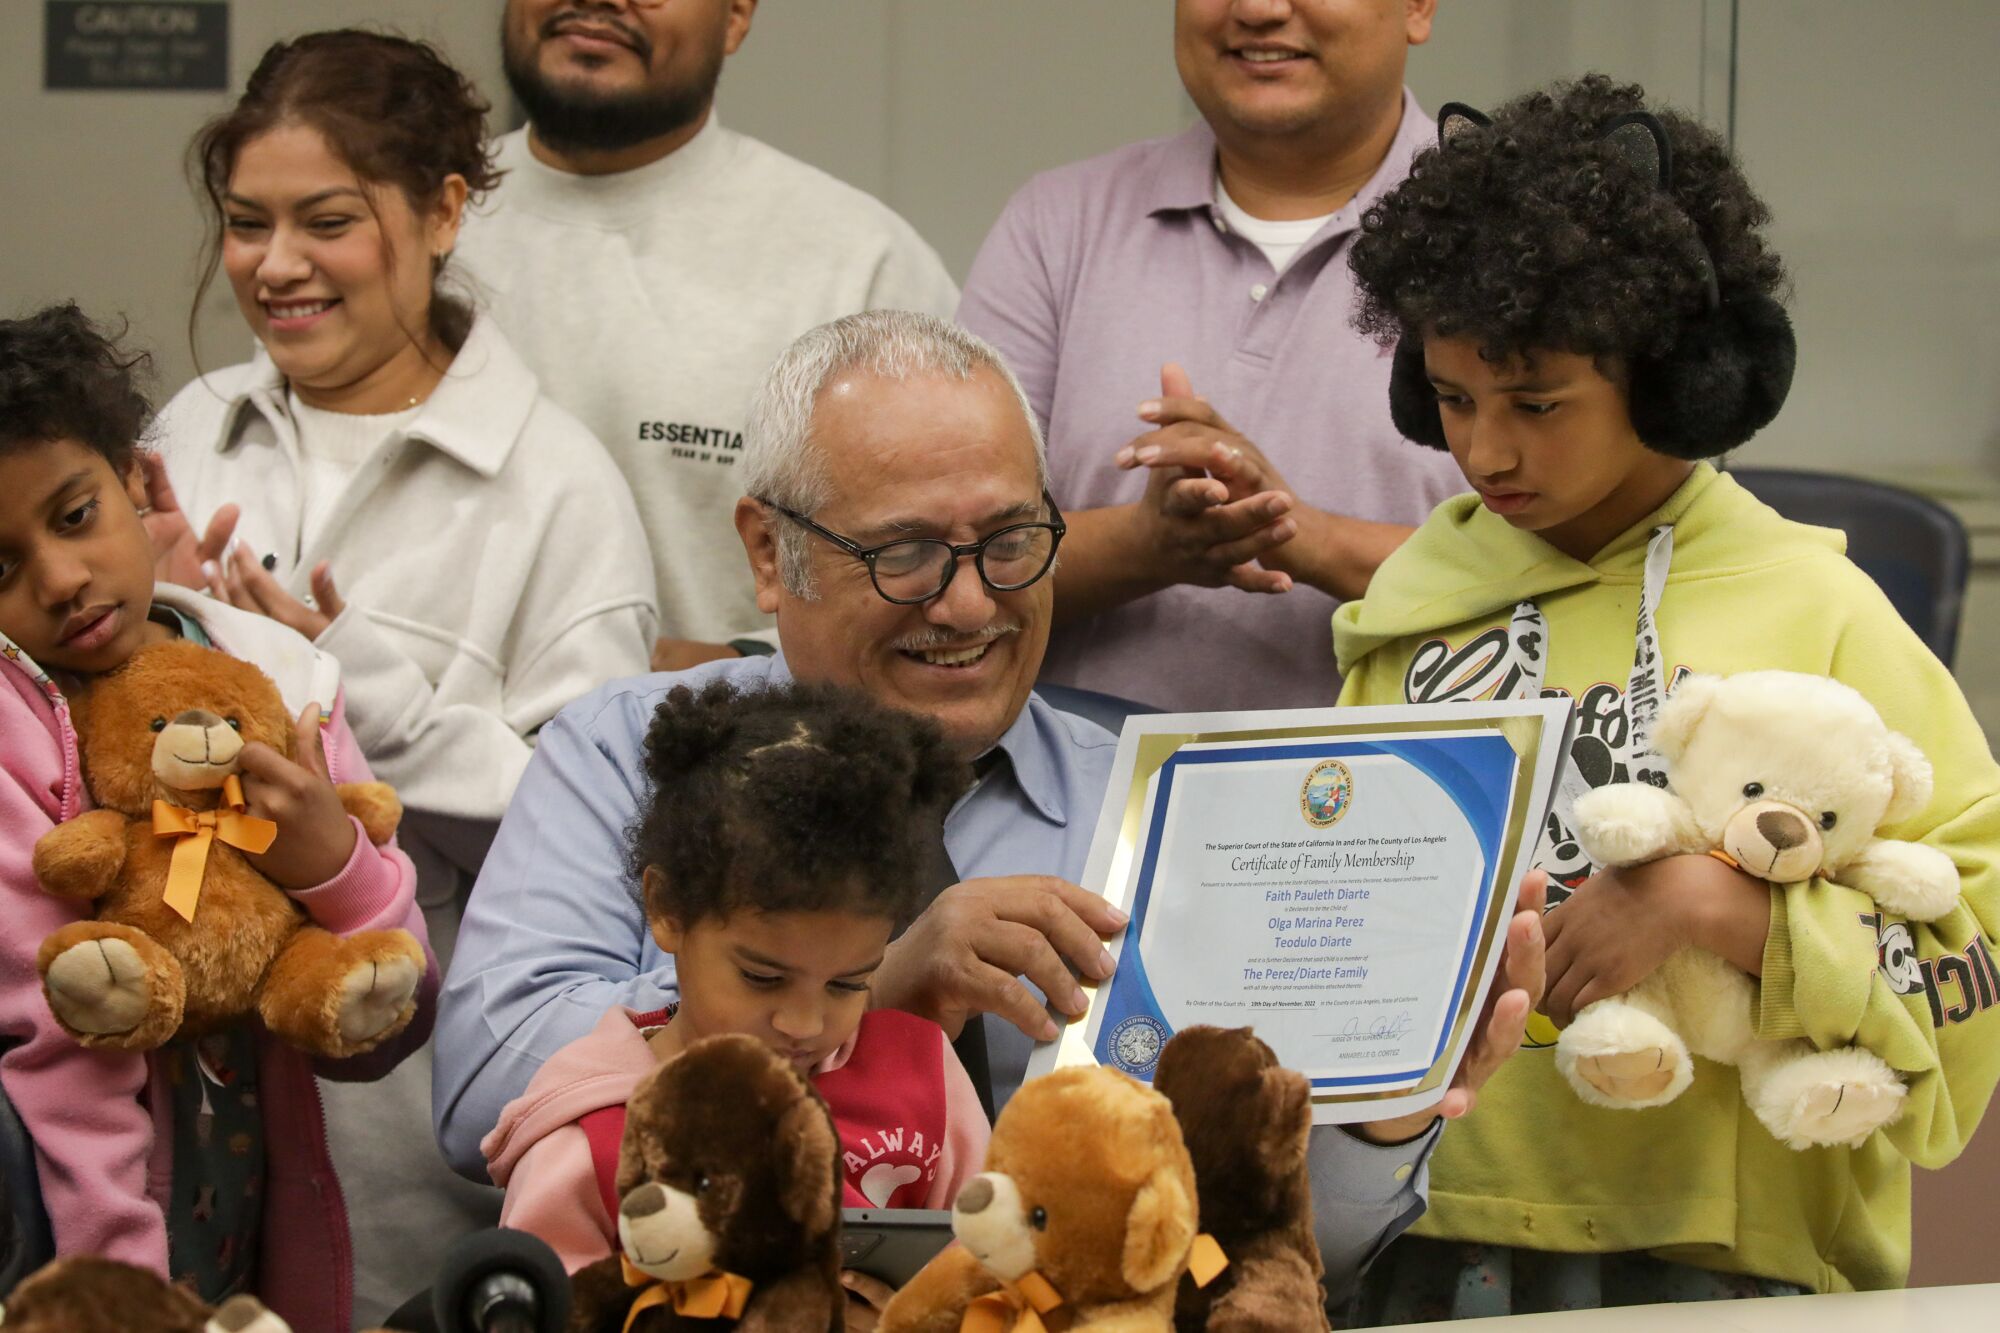 A man holds up a certificate surrounded by family and children